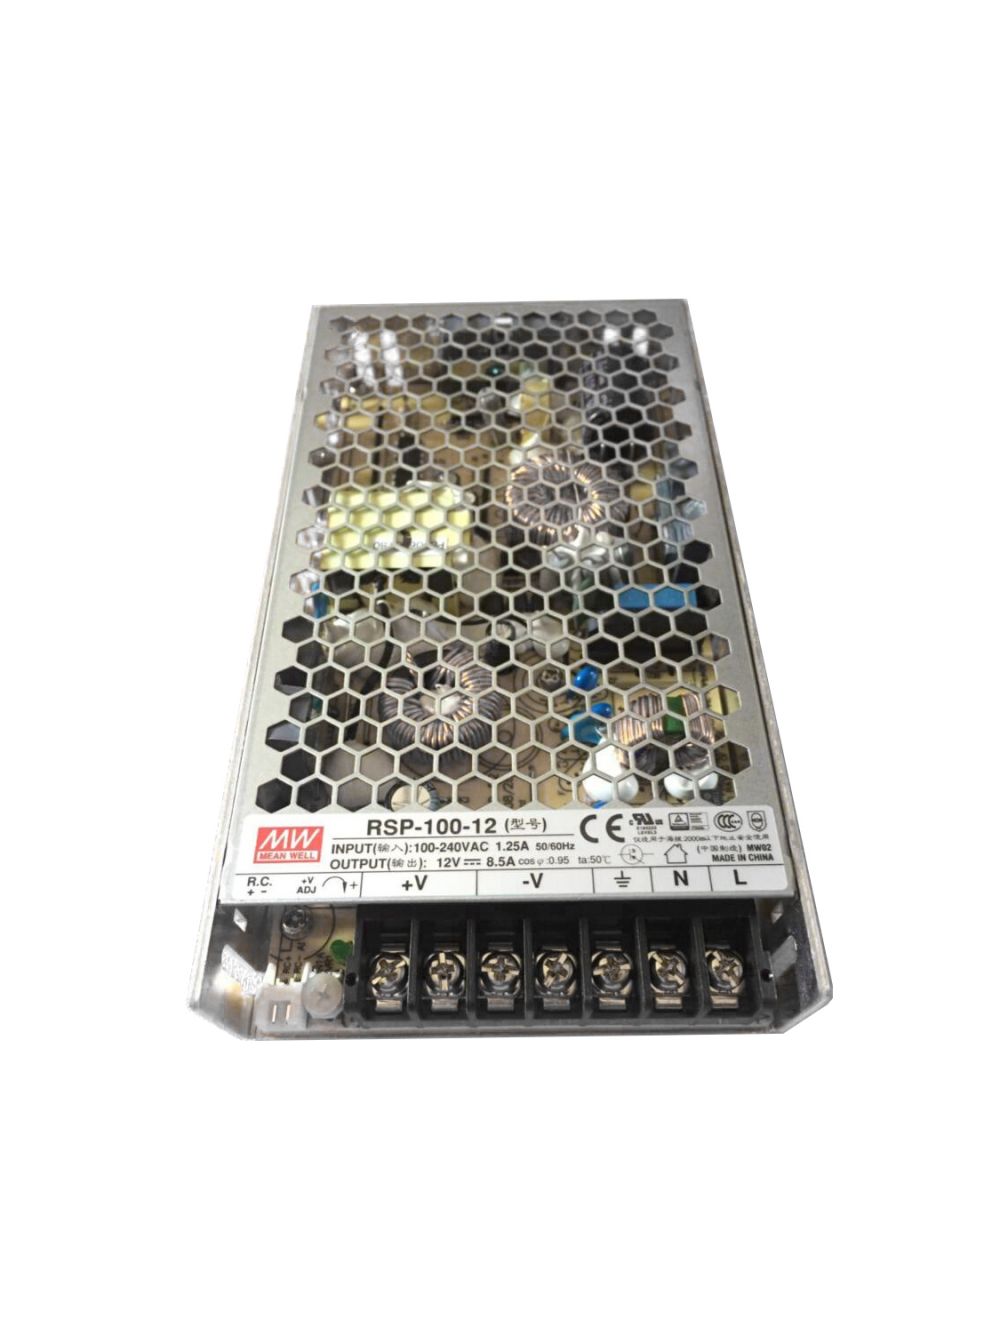 Mean Well Power Supply RSP-100-12